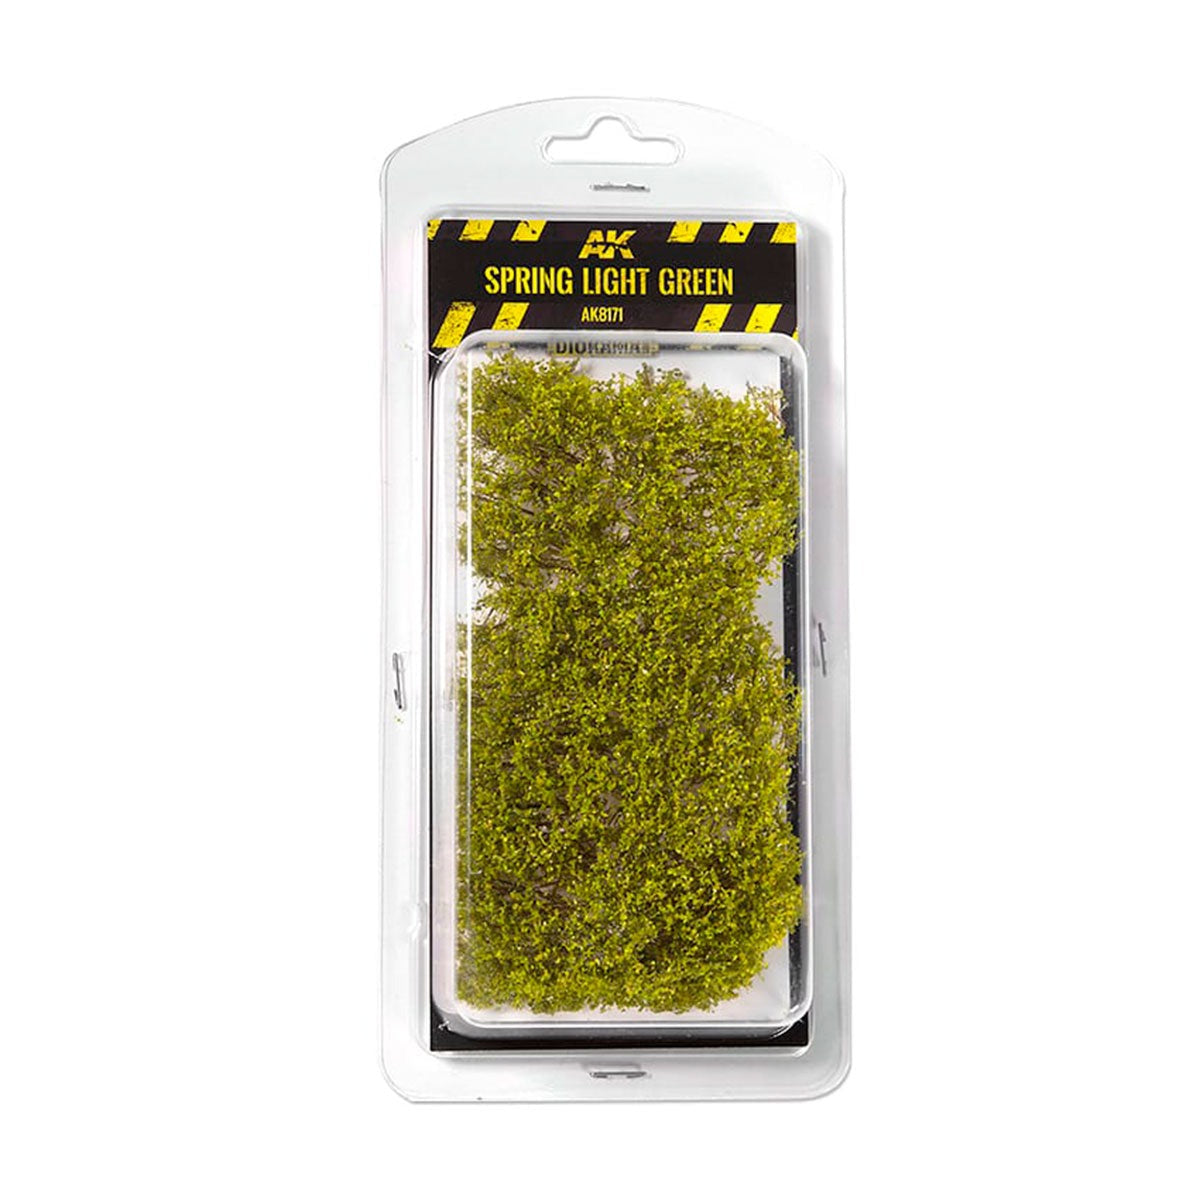 Spring Light Green Shrubberies - Loaded Dice Barry Vale of Glamorgan CF64 3HD